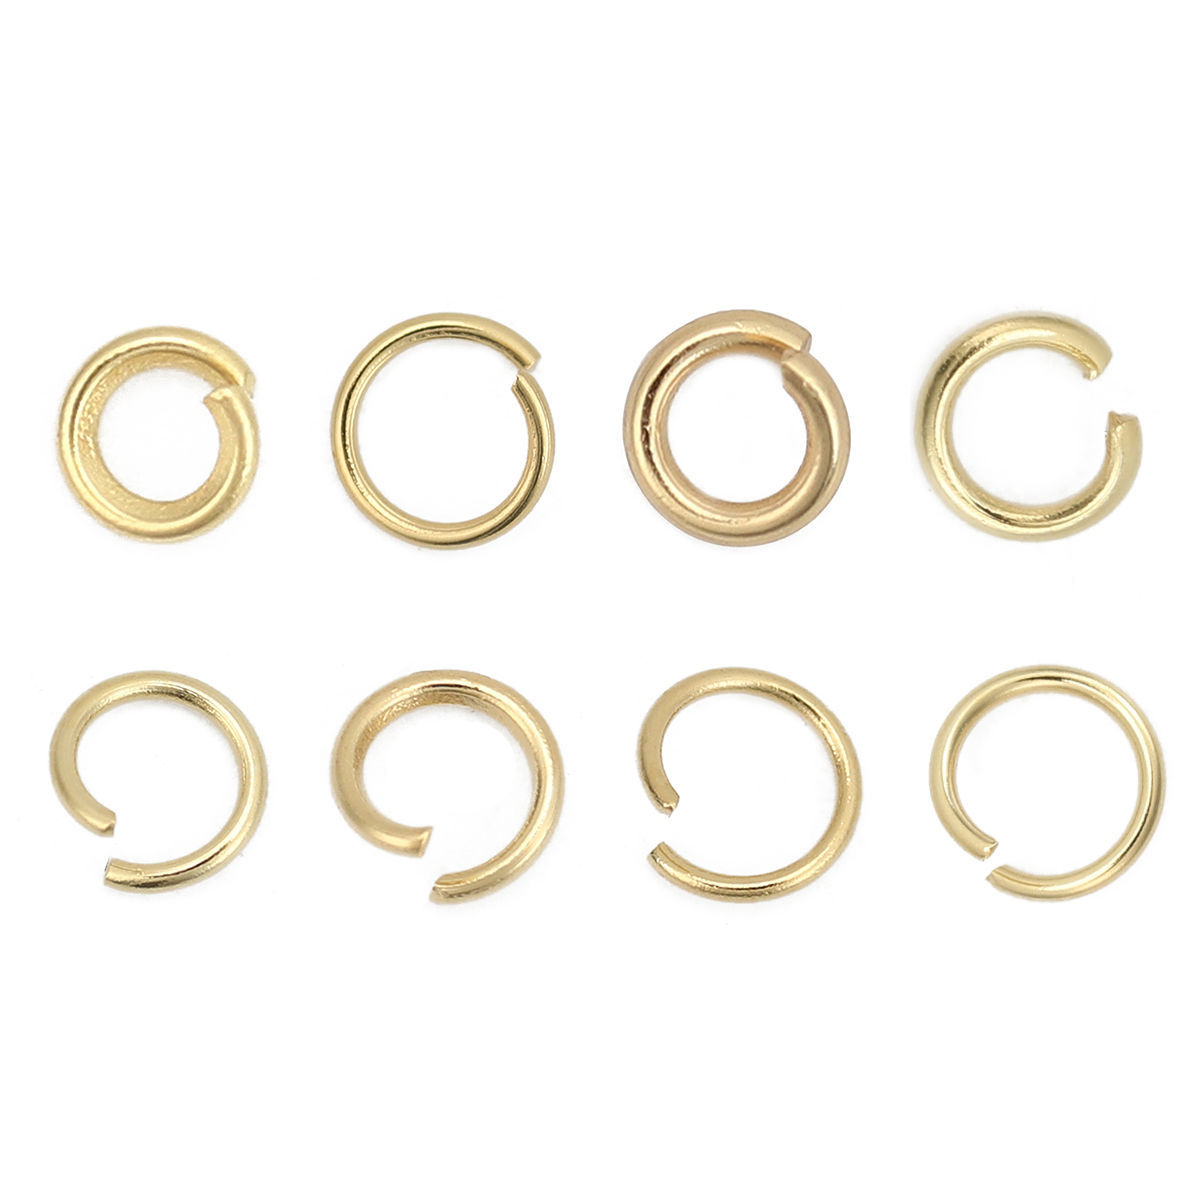 Picture of (21 gauge) 304 Stainless Steel Open Jump Rings Findings Gold Plated 6mm Dia., 1000 PCs